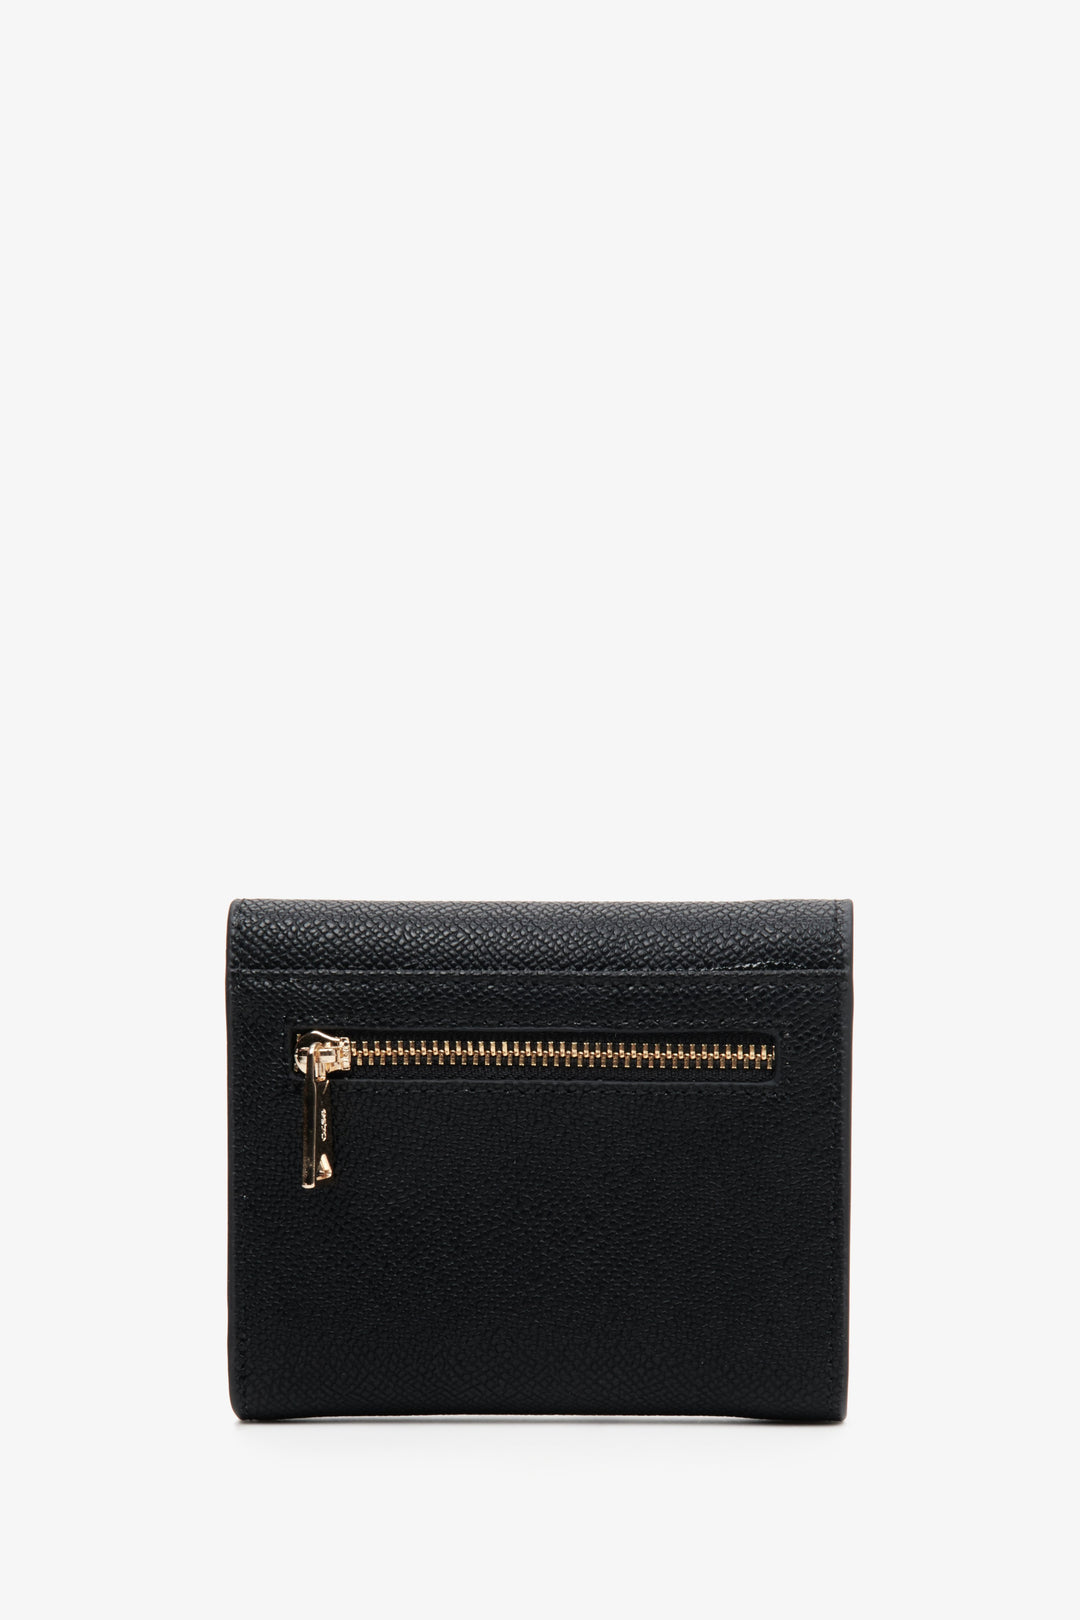 Estro women's leather wallet in black with a gold clasp and accents - reverse side.